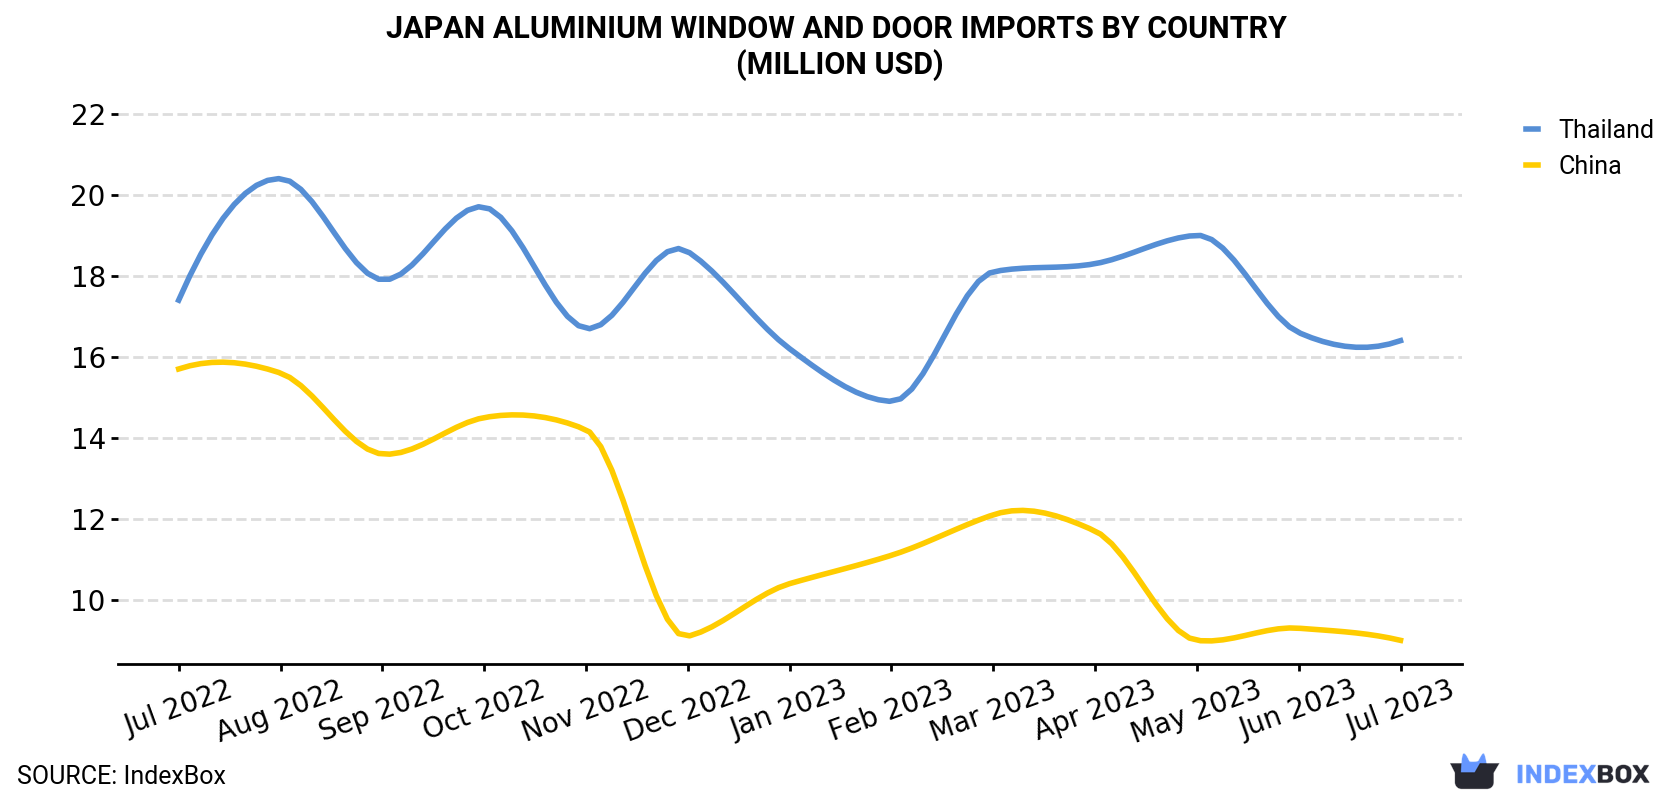 Japan Aluminium Window And Door Imports By Country (Million USD)